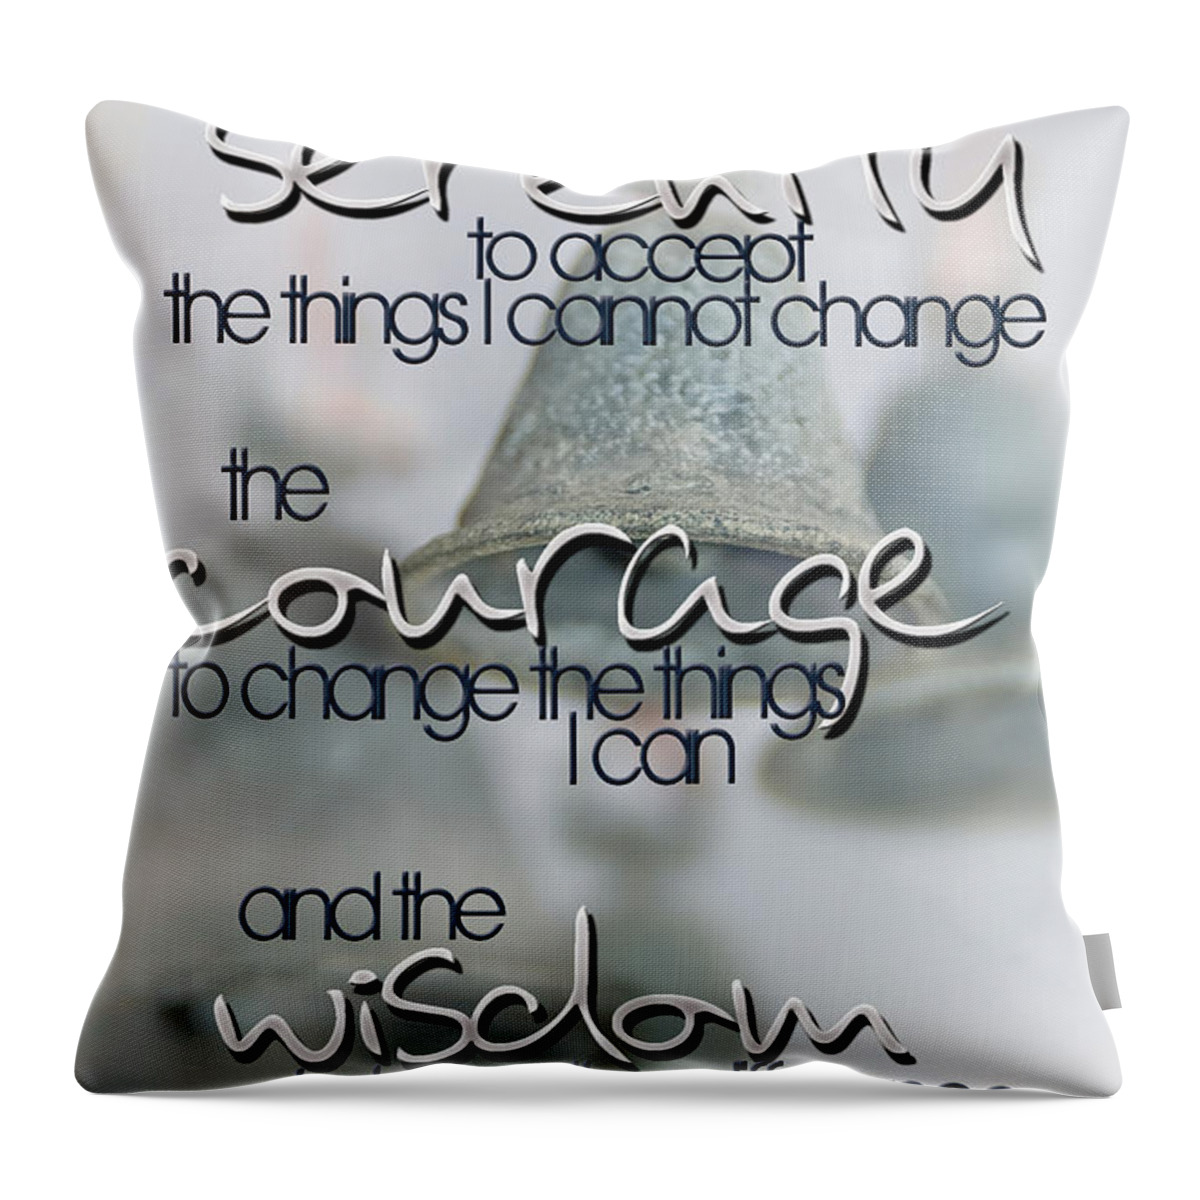 Serenity Prayer Throw Pillow featuring the photograph Serenity Prayer with Bells by Vicki Ferrari